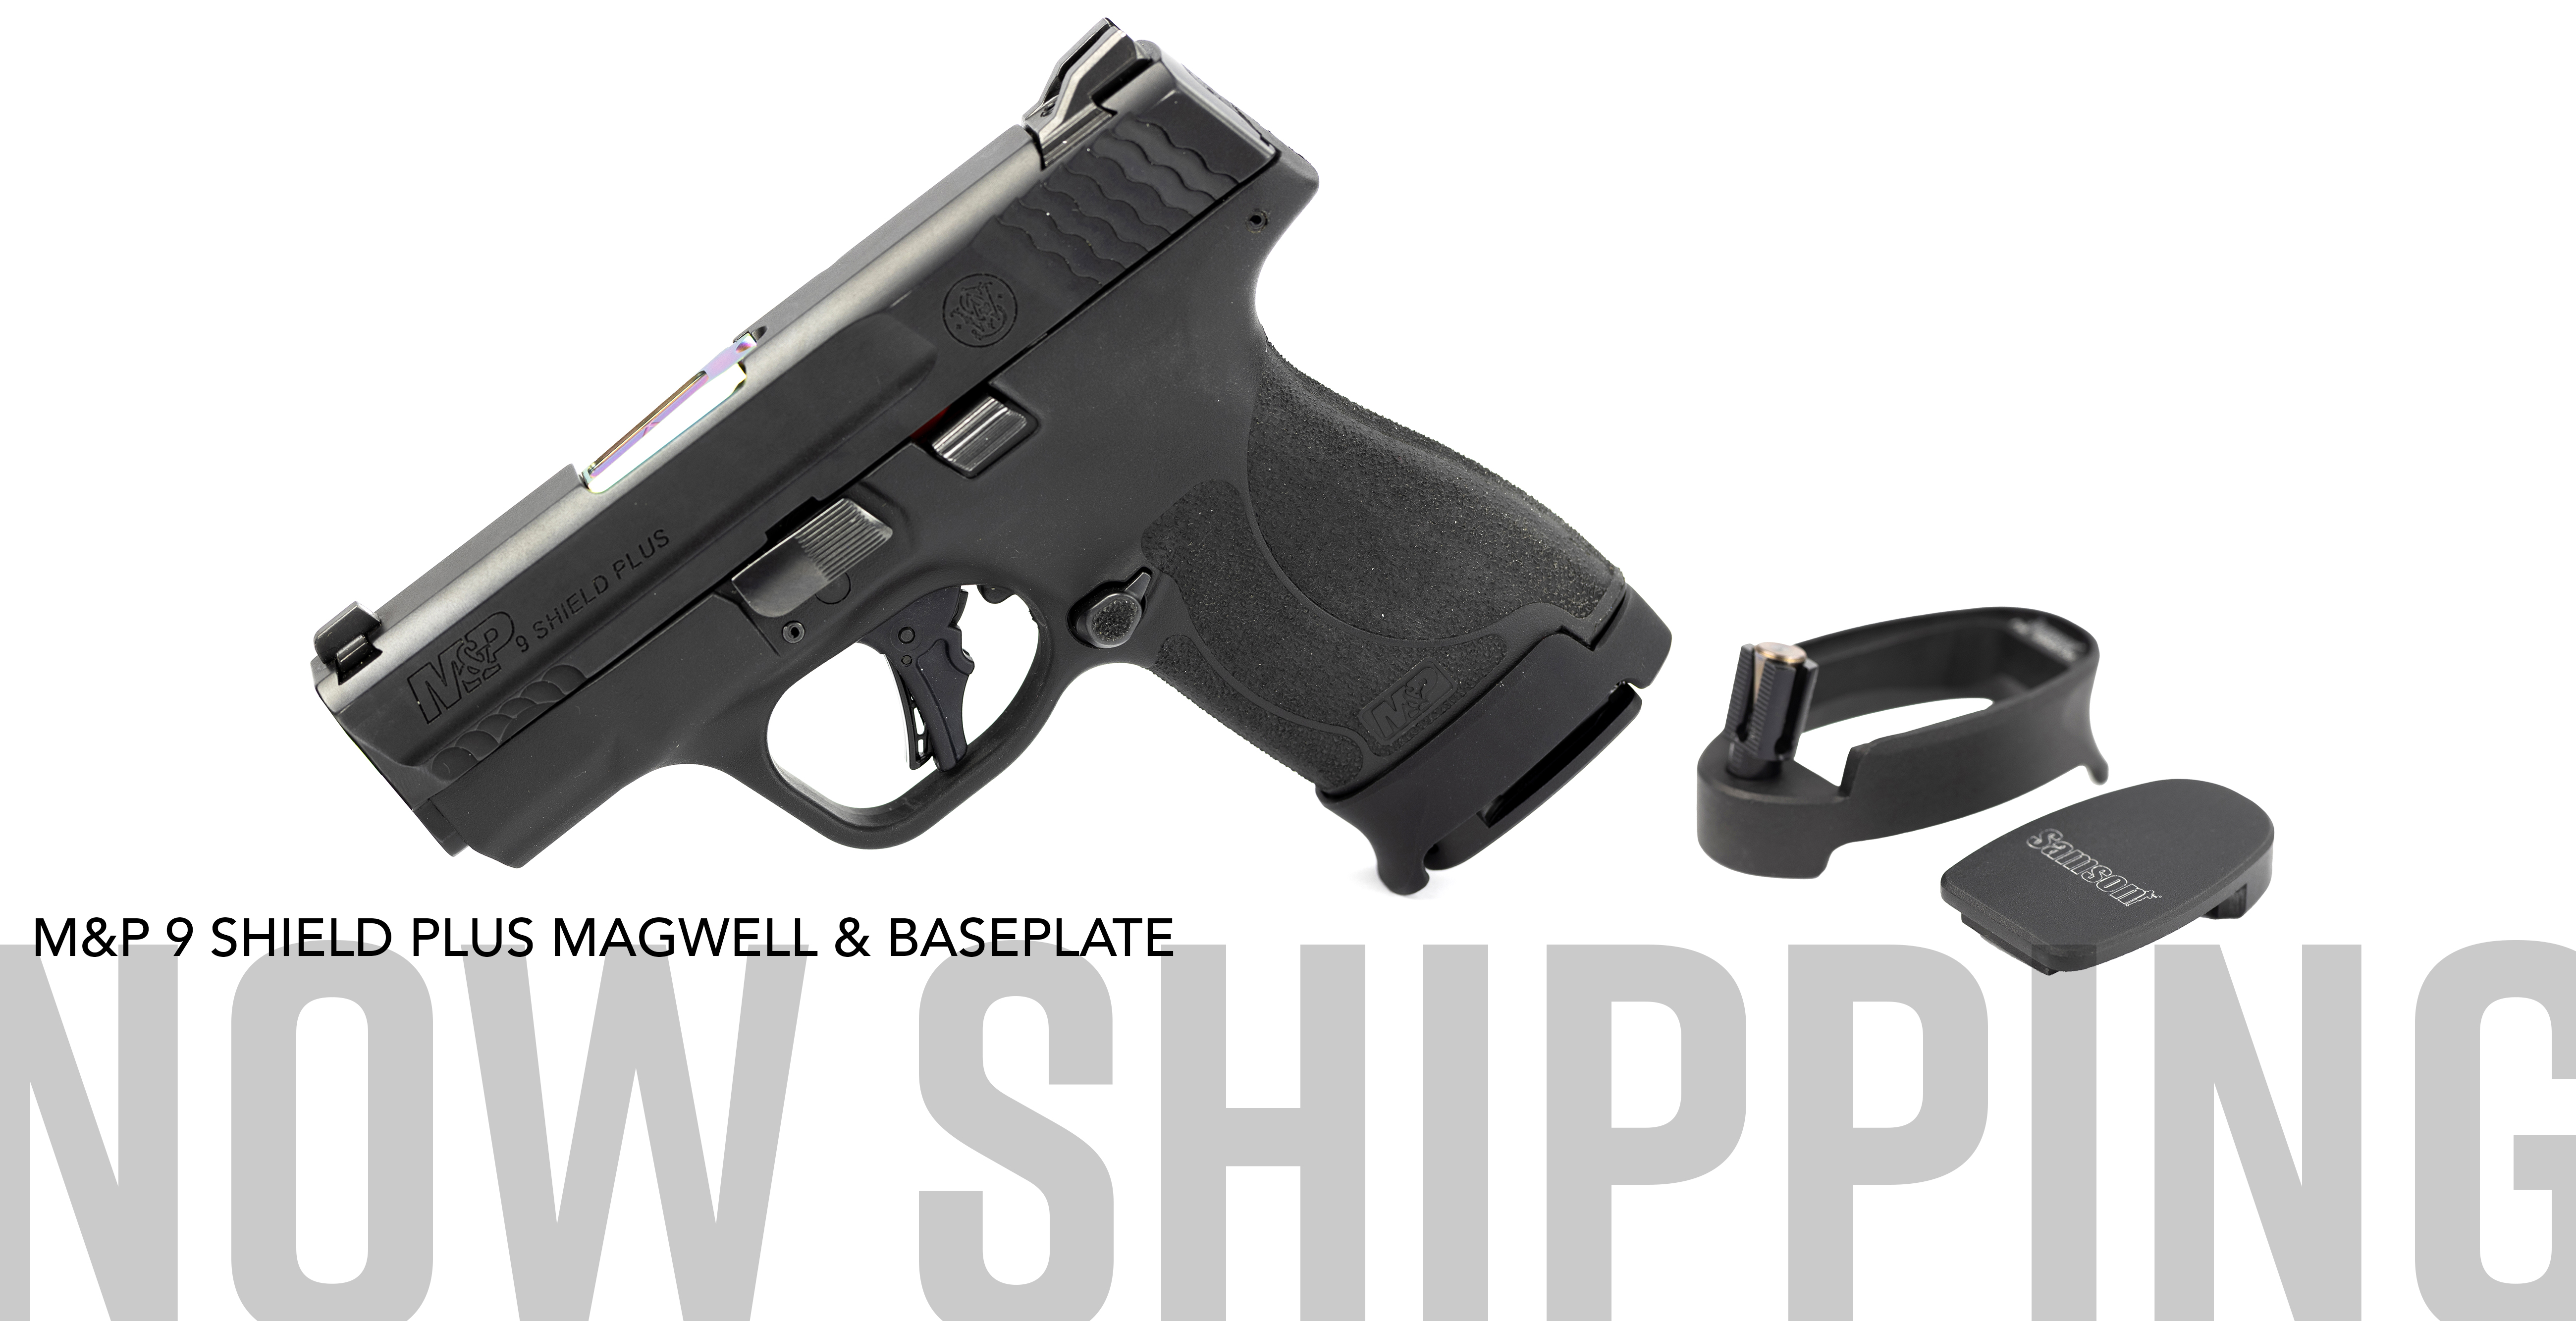 M&P 9 Shield Plus Magwell and Baseplate